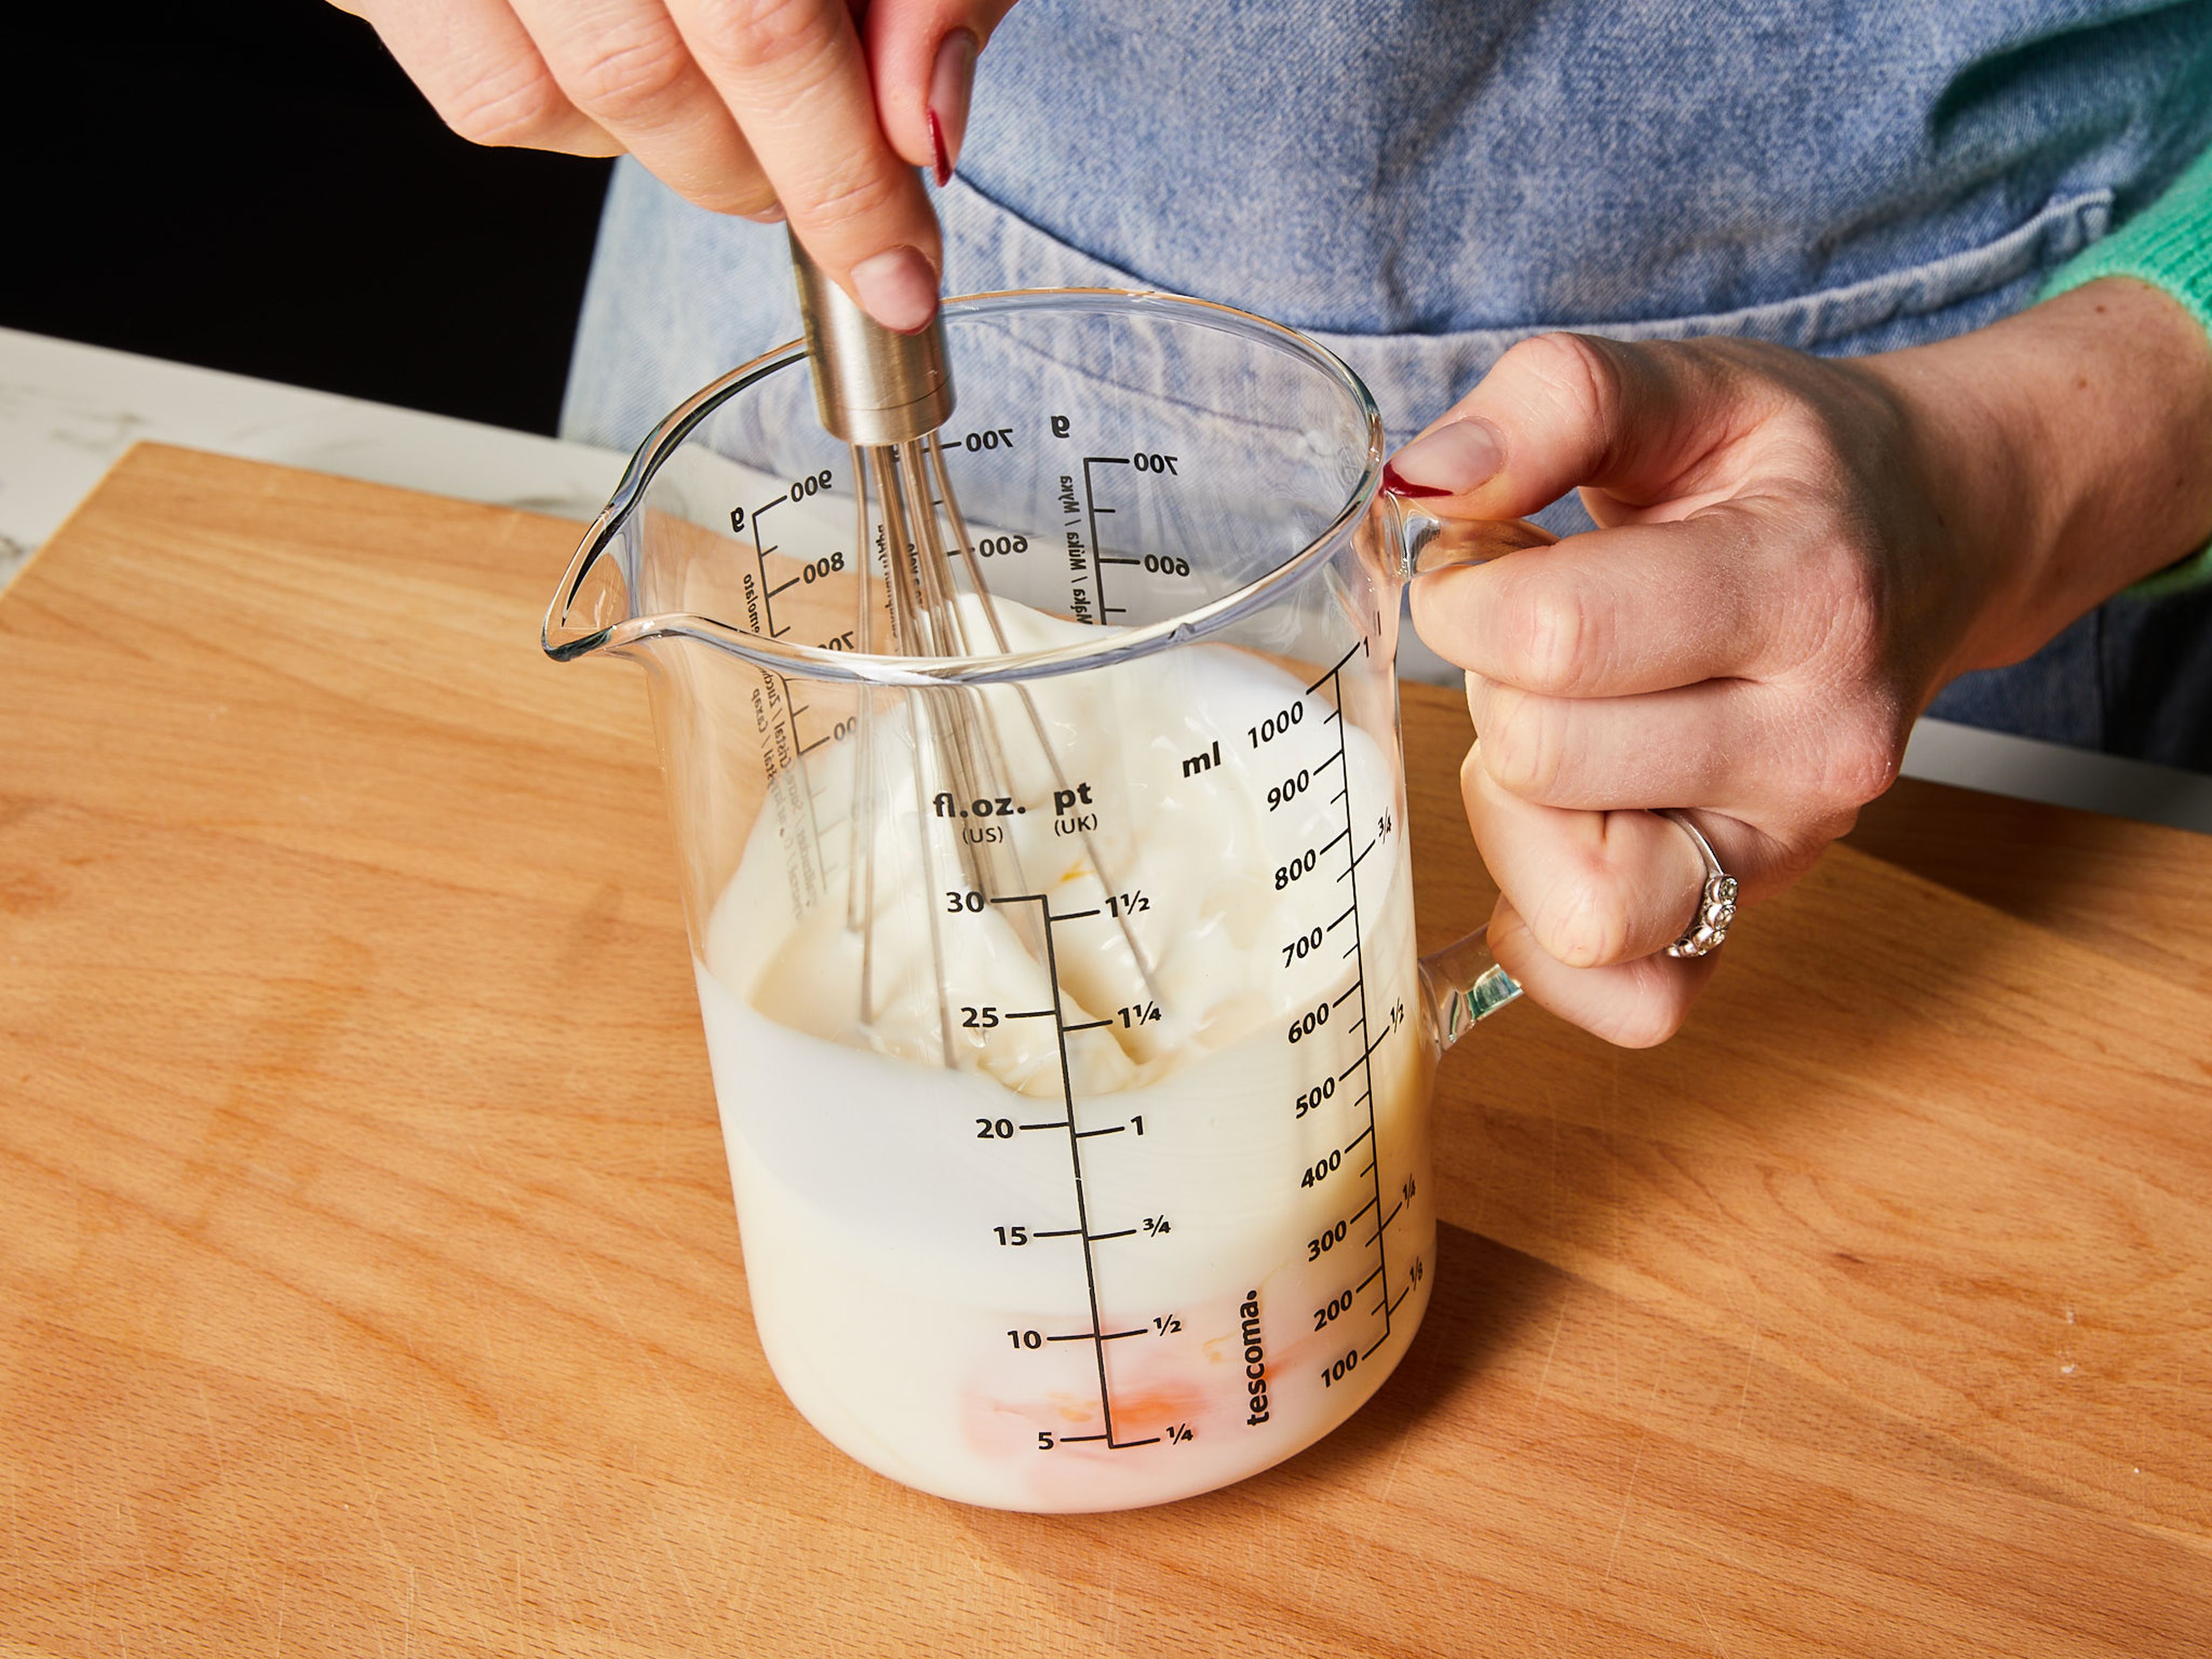 Whisk the eggs and milk in a small measuring cup. Then stir in the melted butter.